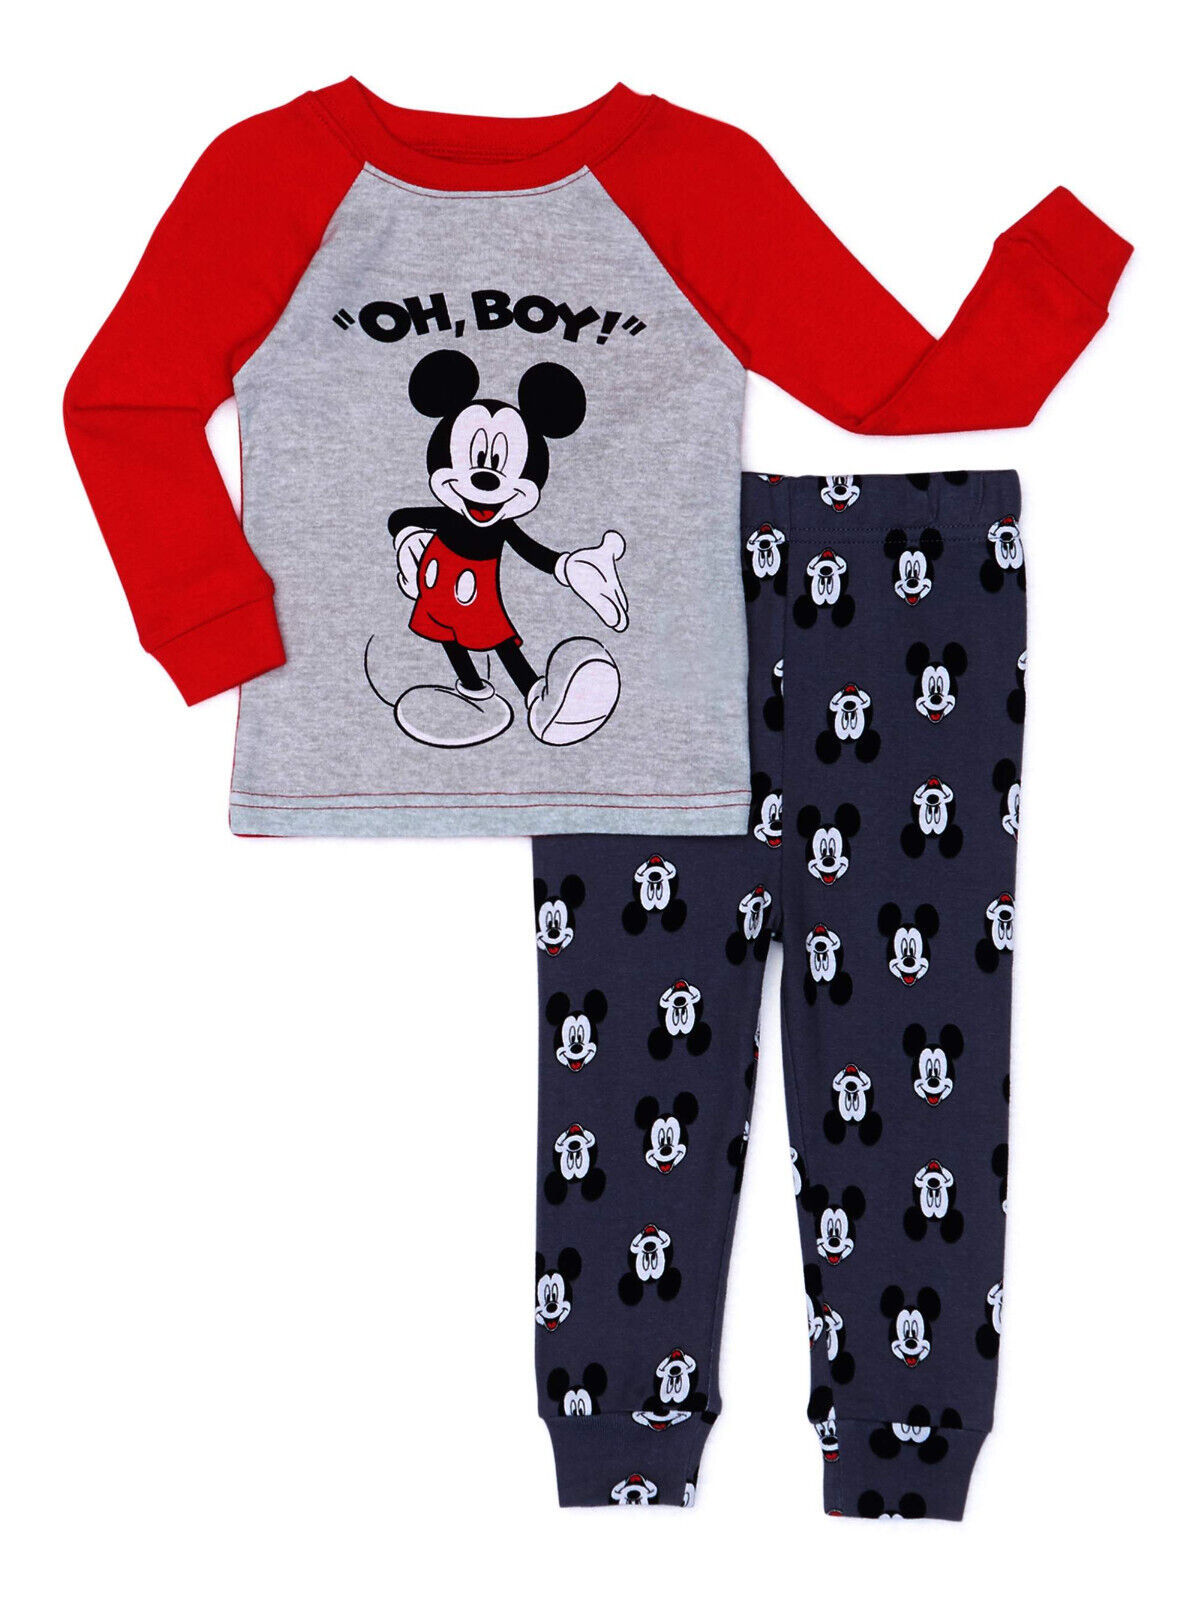 Little Boys Toddler 2-Piece Character Pajama Set Mickey Oh Boy Size 9 Months - $24.99